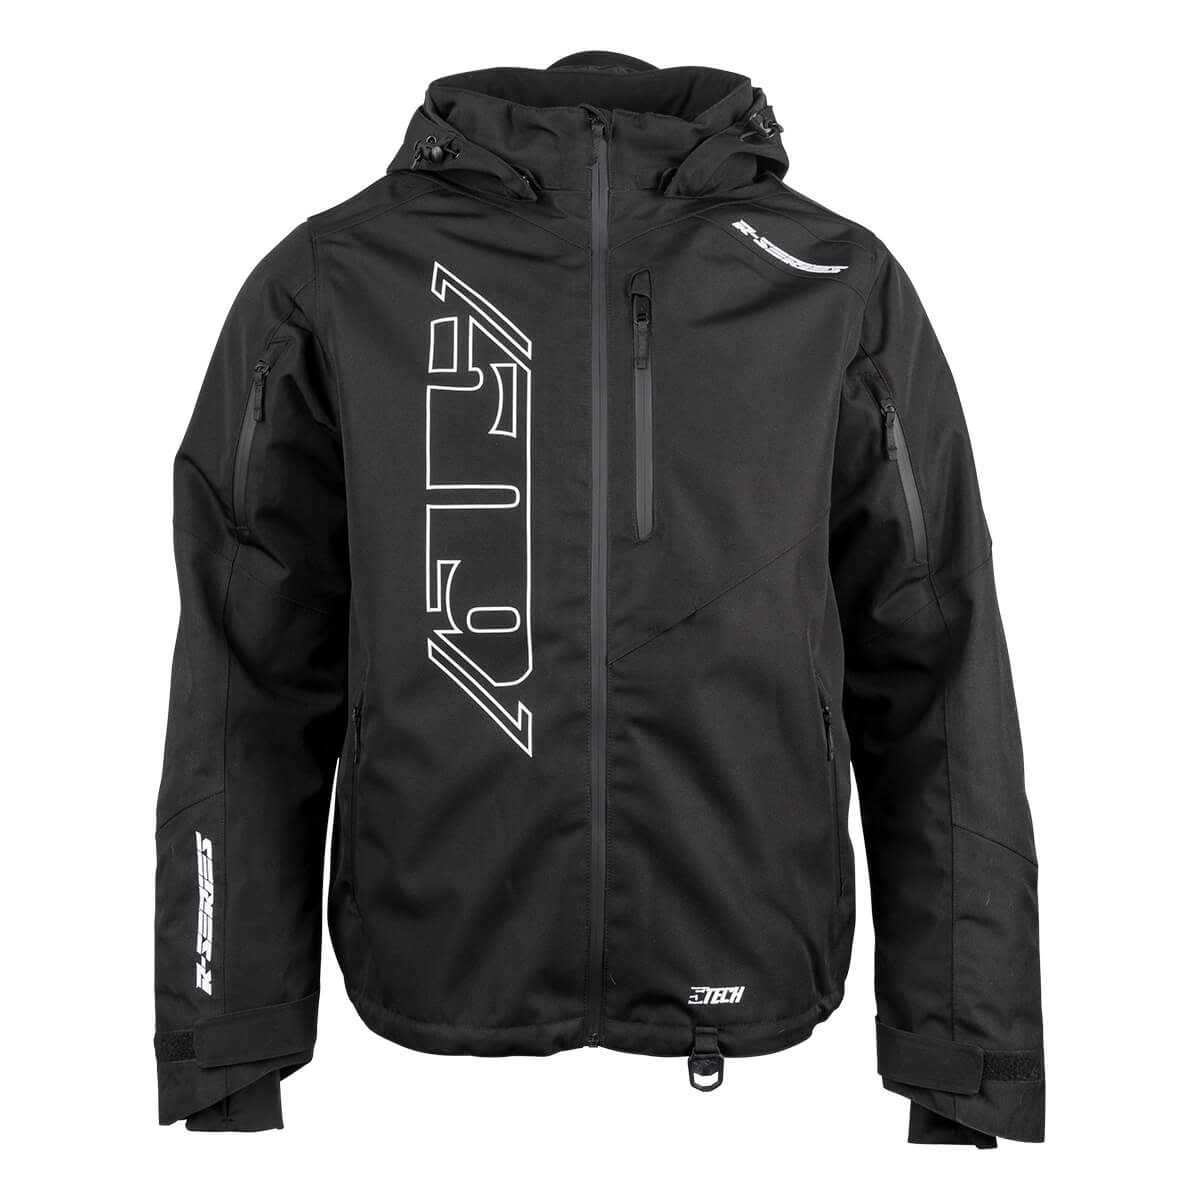 509 insulated jackets for men r 200